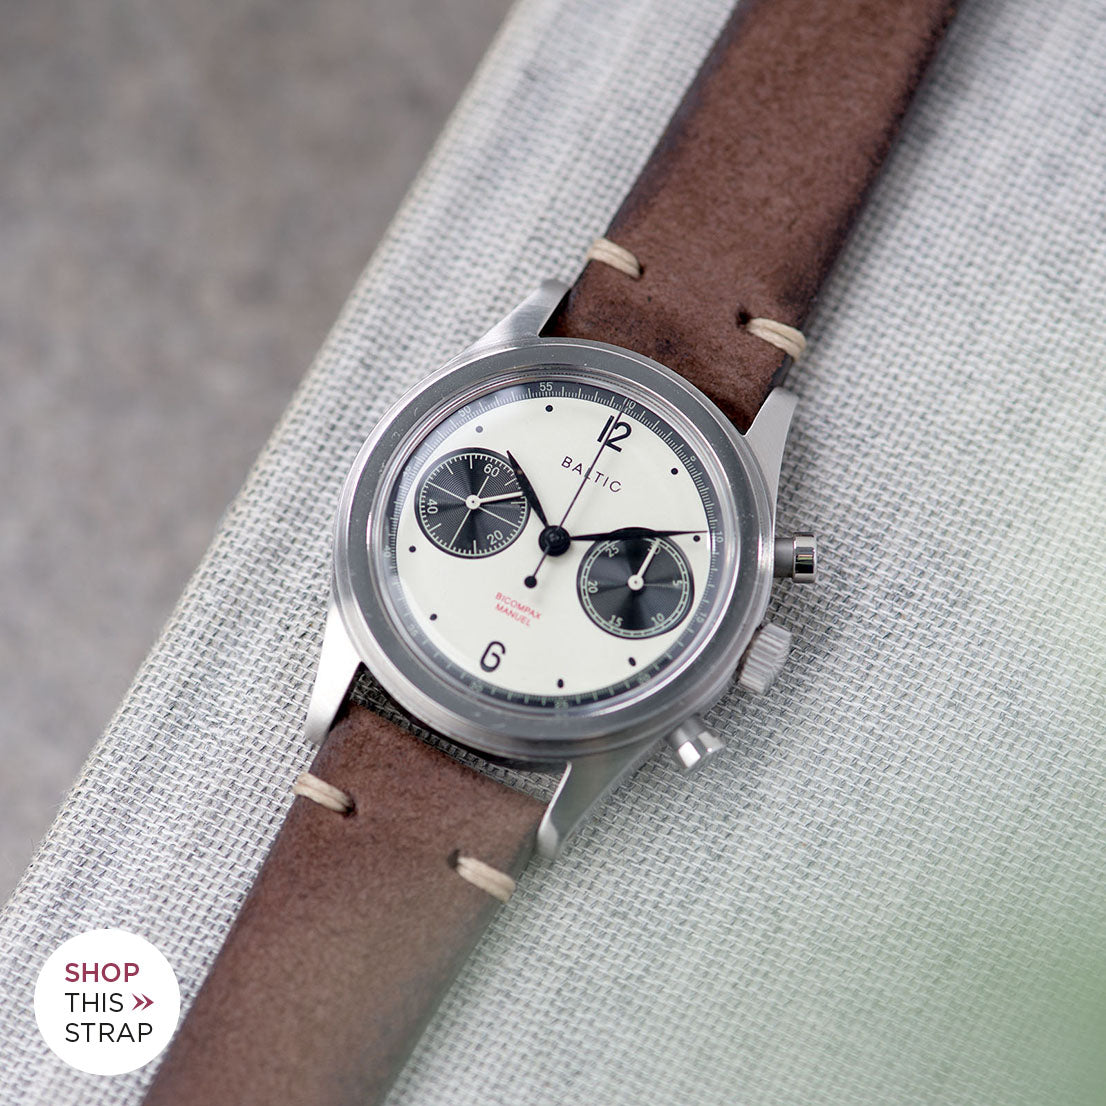 Bulang and Sons_Strap Guide_The Baltic-Chronograph-Panda-Limited-Edition_Dark Brown Rugged Leather Watch Strap